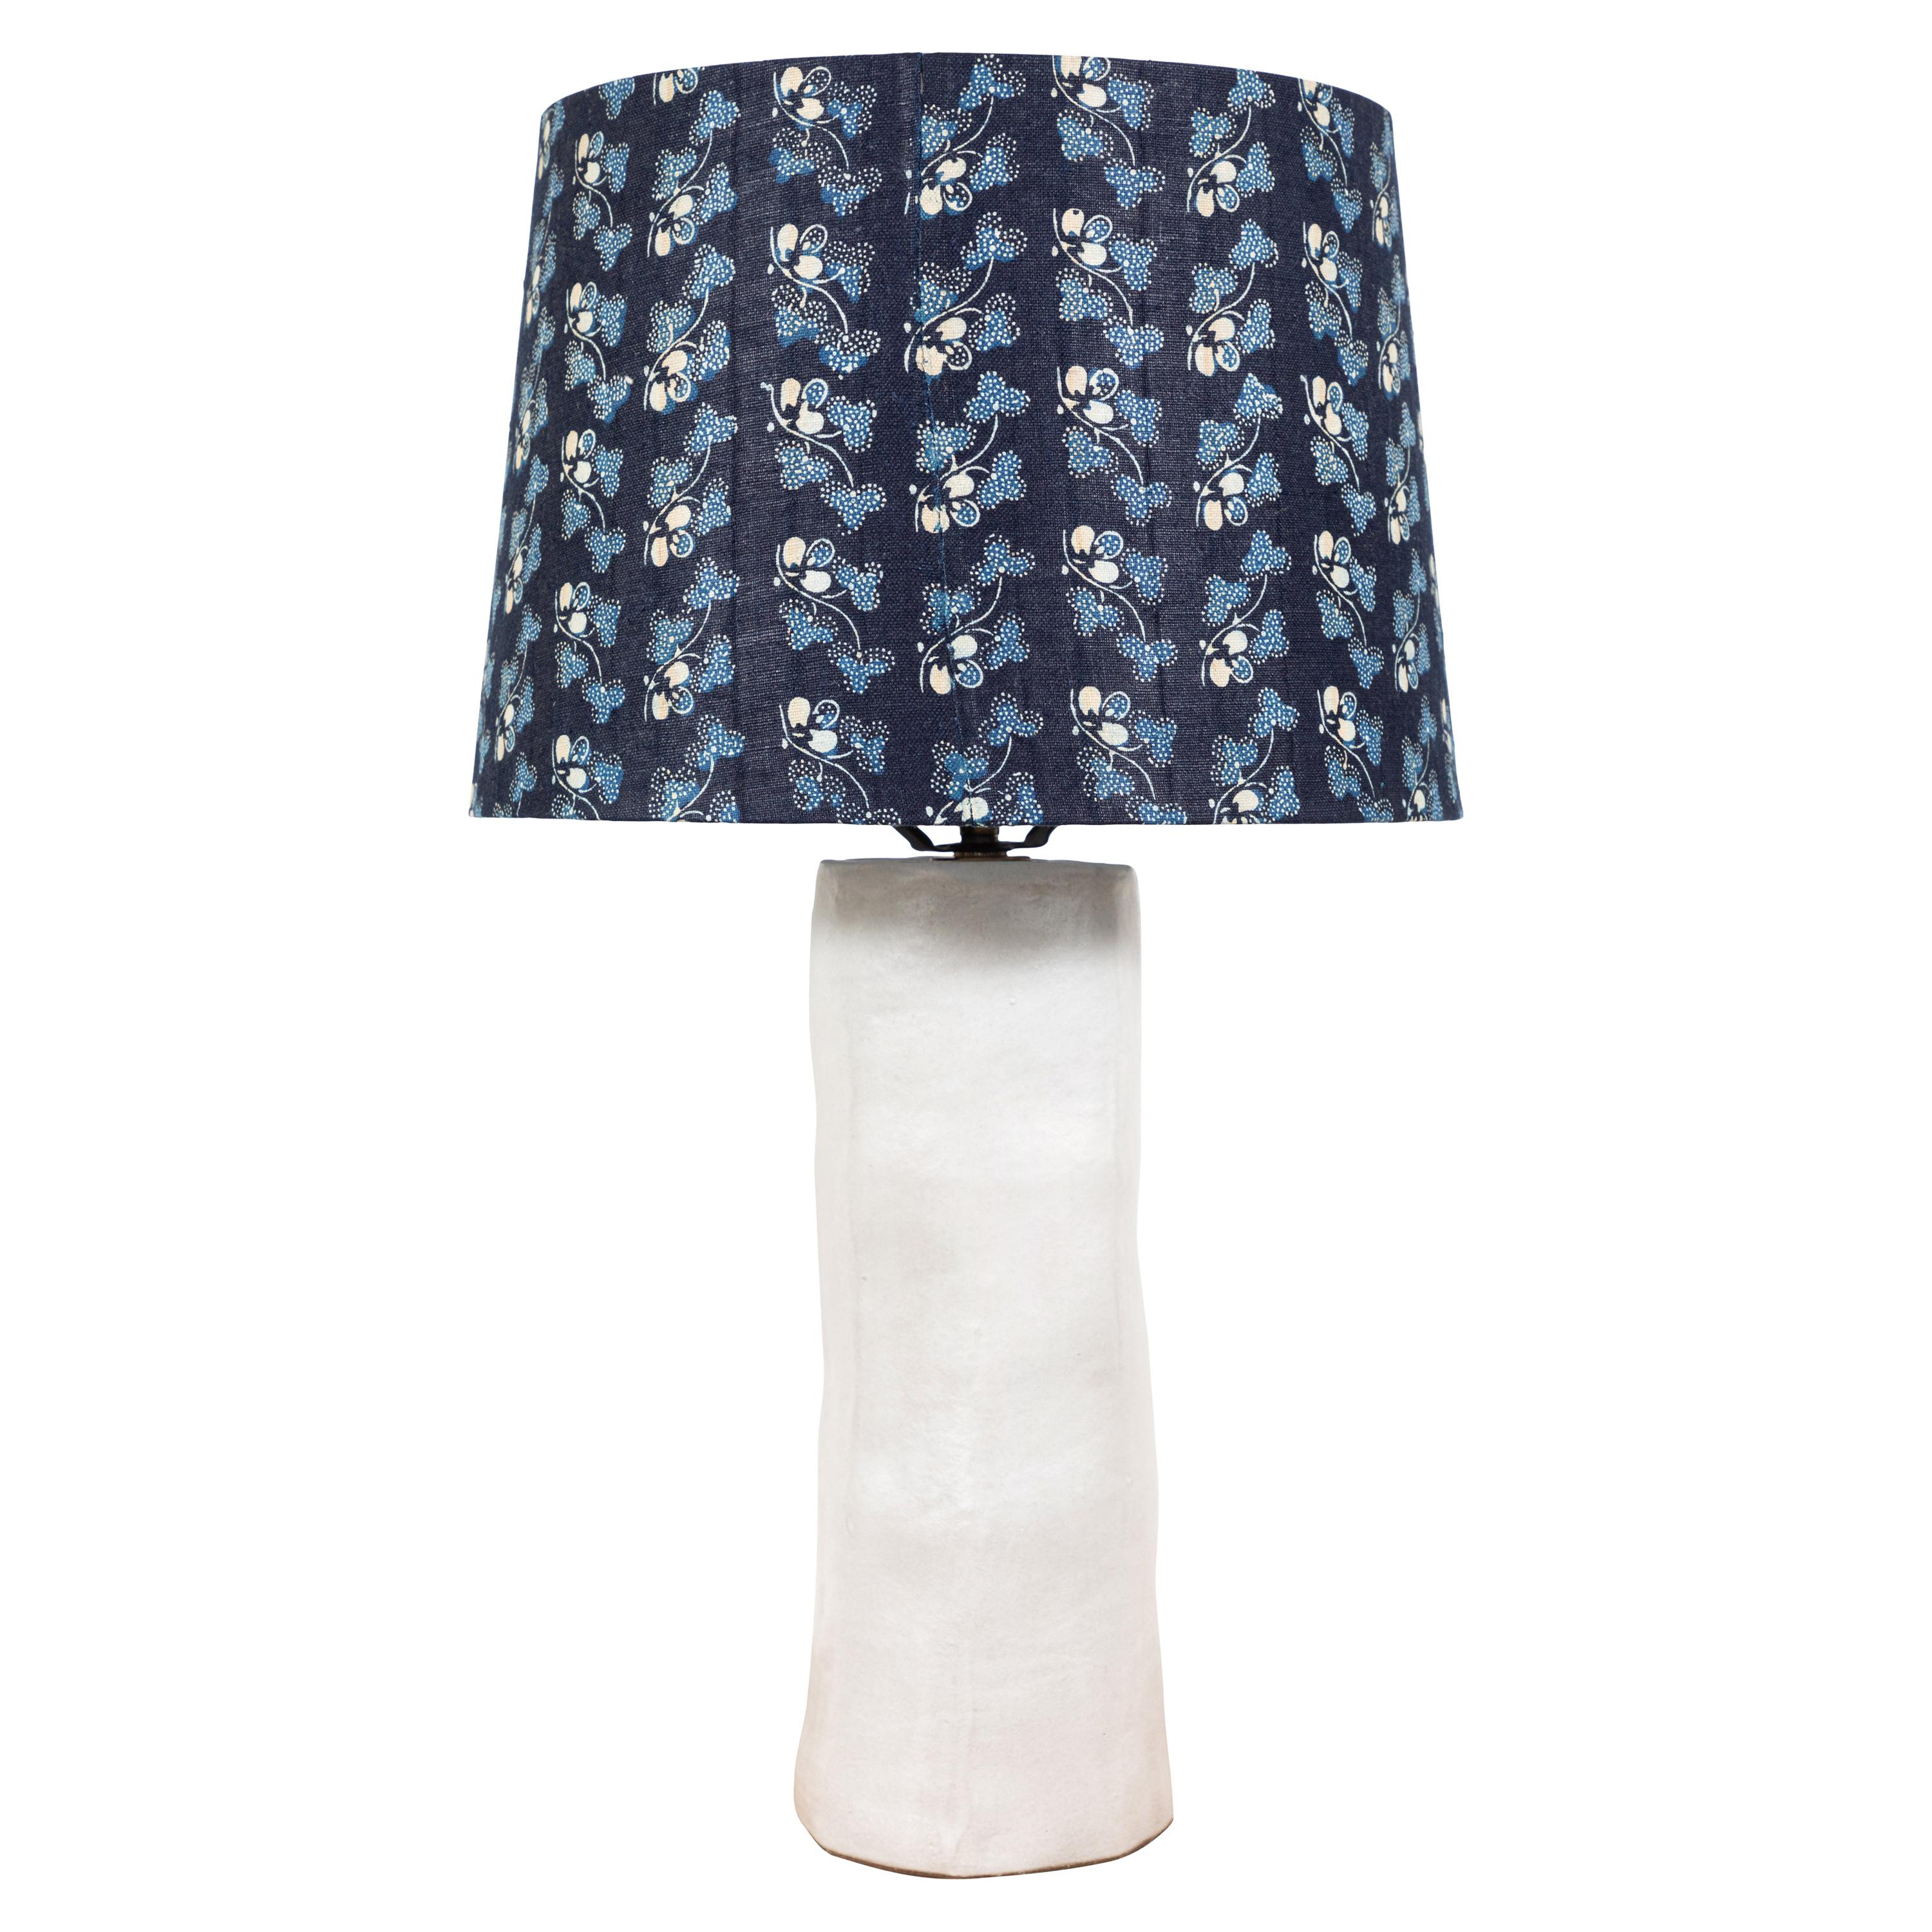 Pair of Handmade Ceramic Lamps with Blue Shades